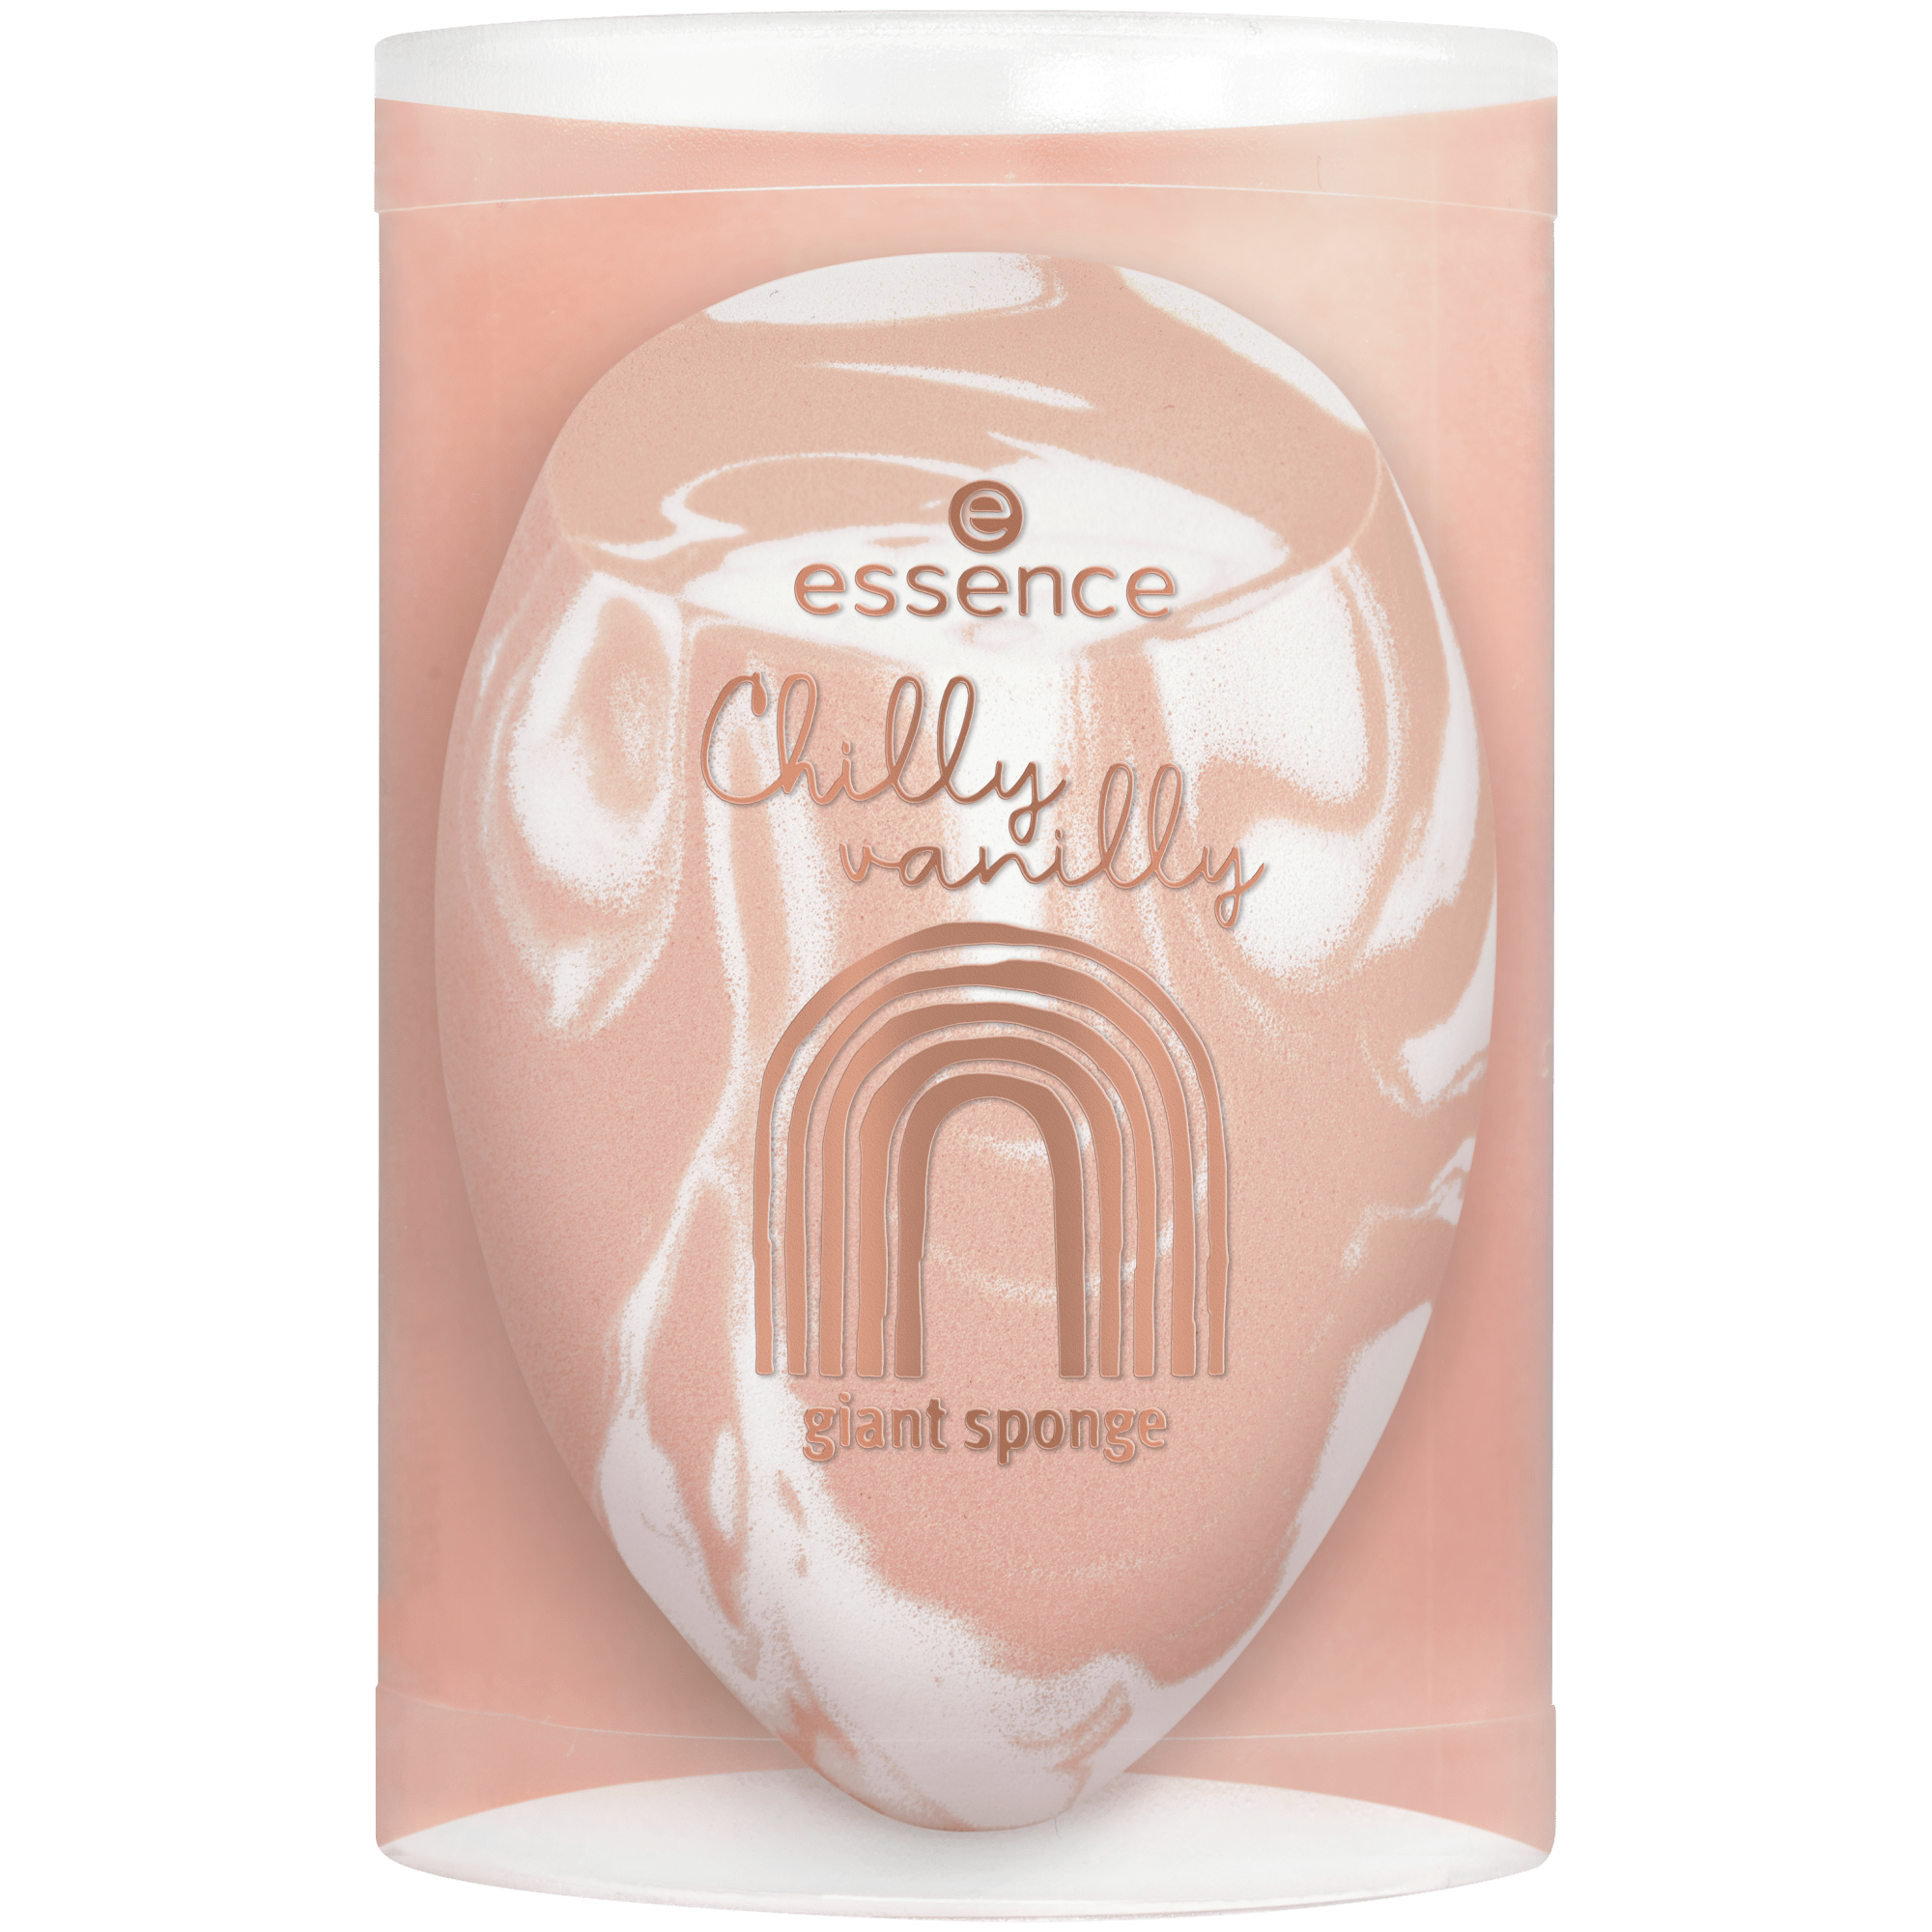 essence-Chilly-vanilly-giant-sponge-01